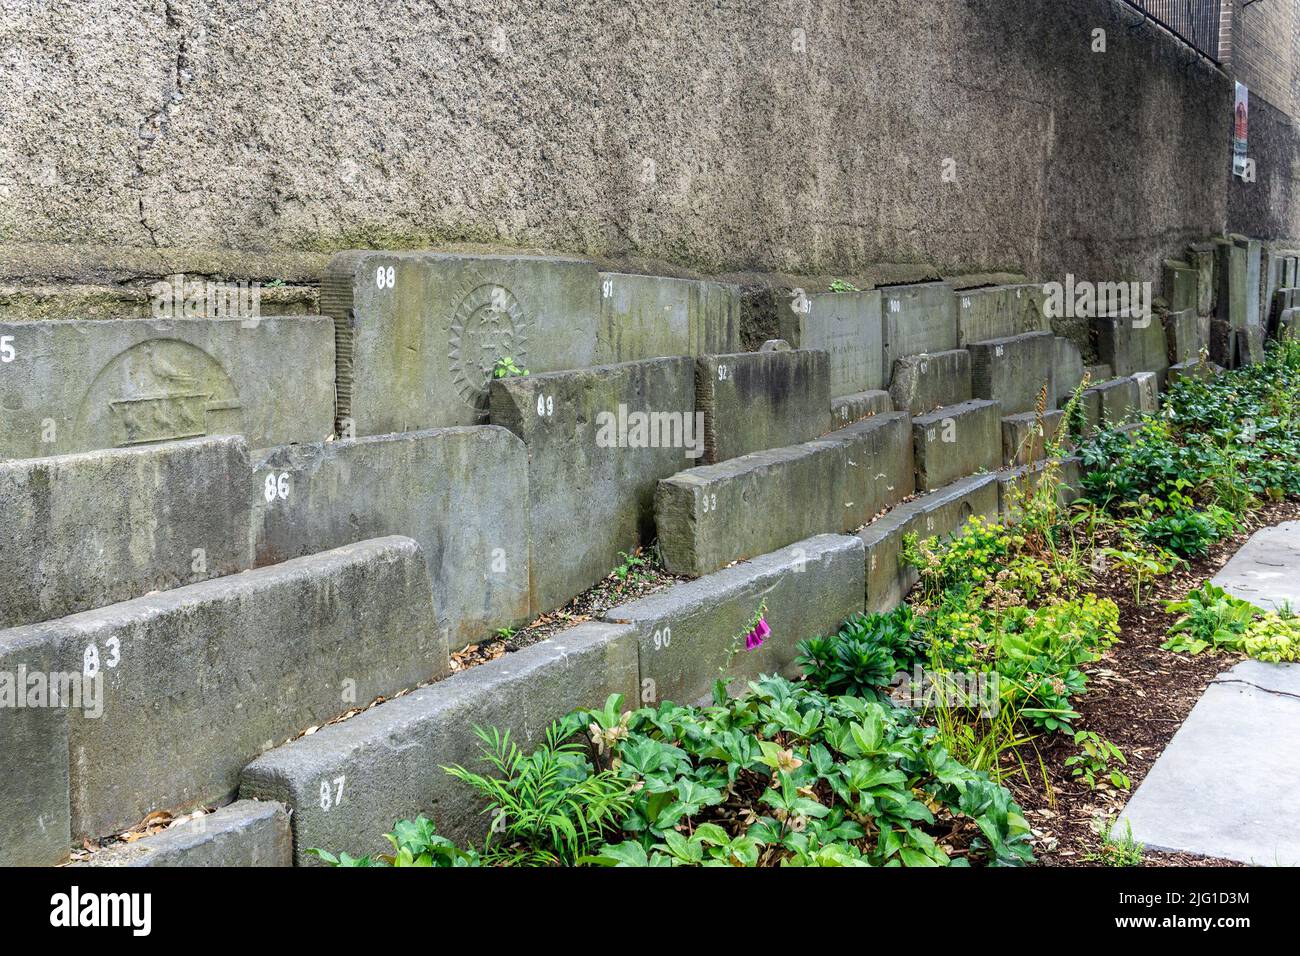 Old gravestones in Wolfe Tone Park in the centre of Dublin, Ireland. The park was once the graveyard of St Marys Church. Deconsecrated in 1966. Stock Photo